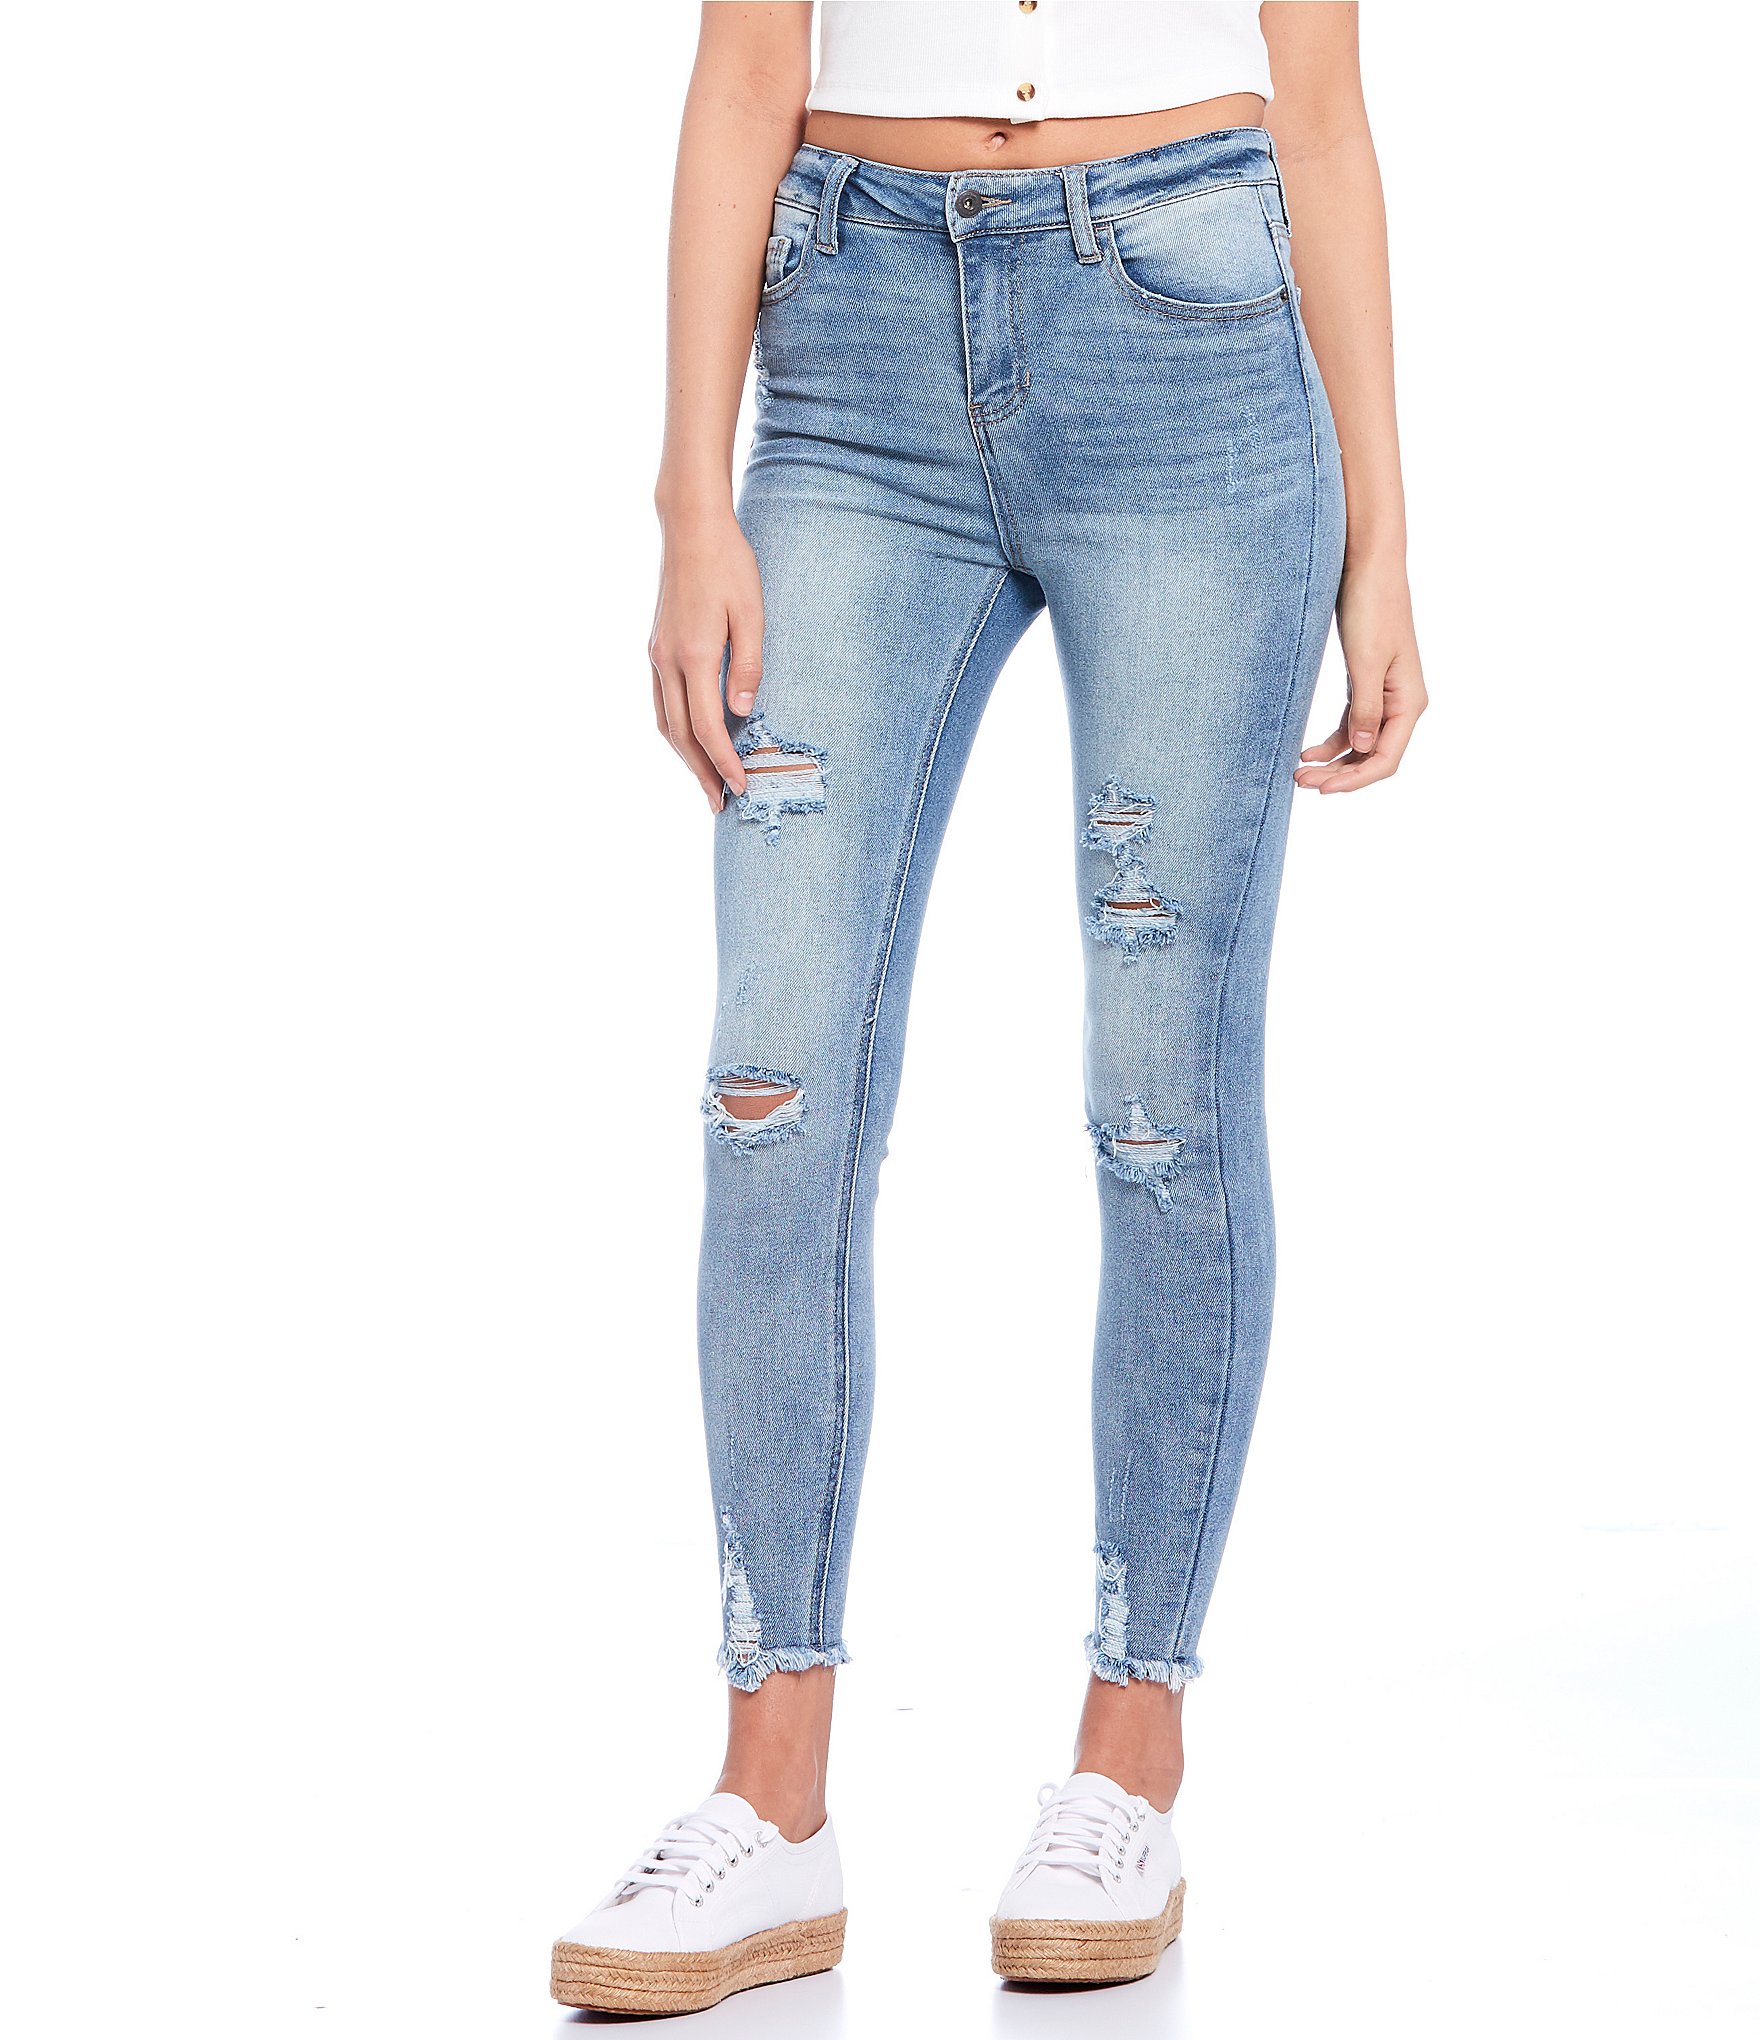 Hippie Laundry Throwback Destructed High Rise Skinny Jeans | Dillard's